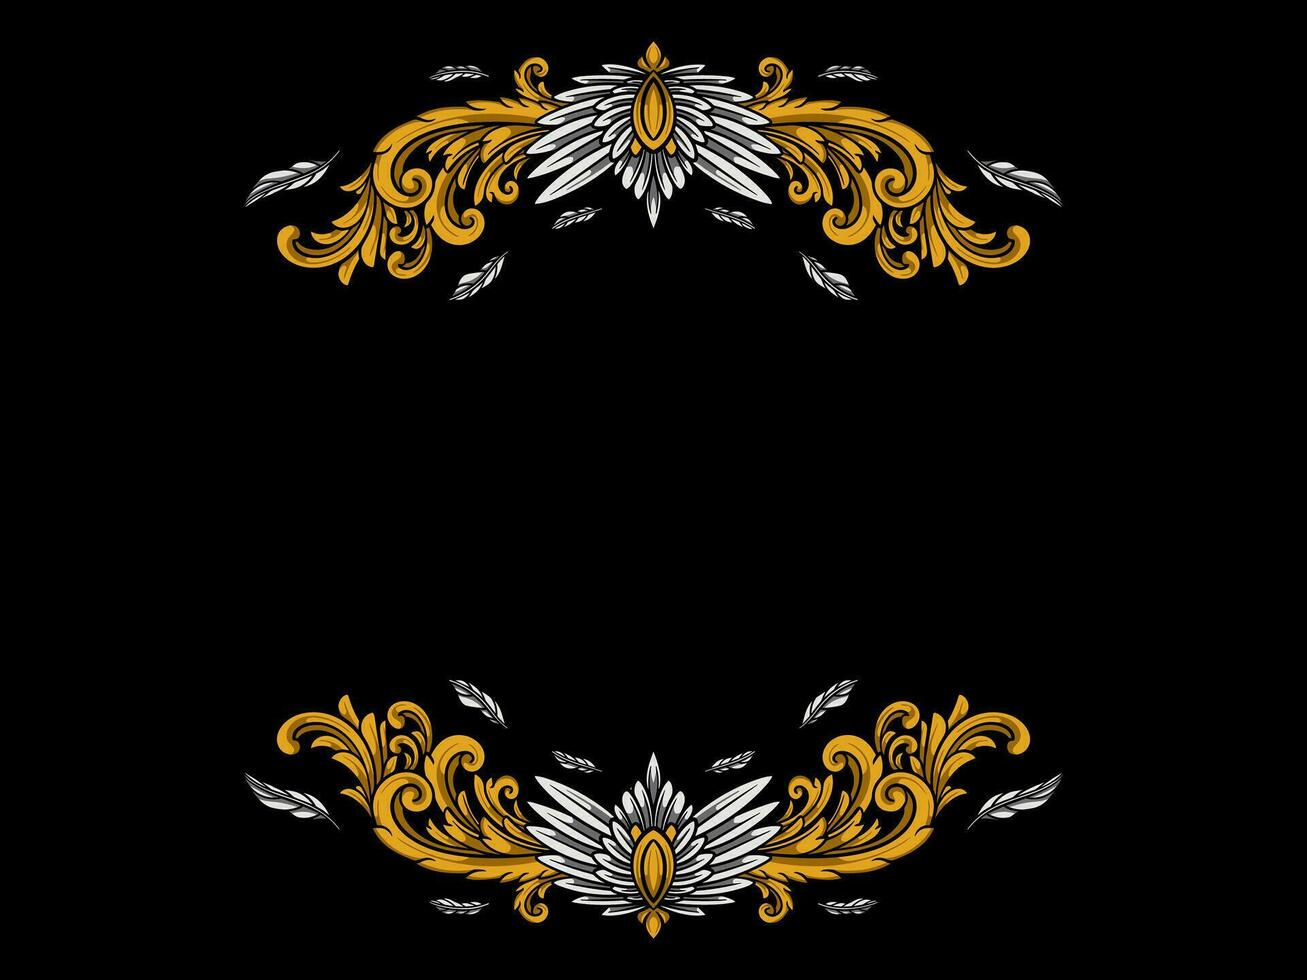 Gold Ornament Classy Luxury Fur Wings vector